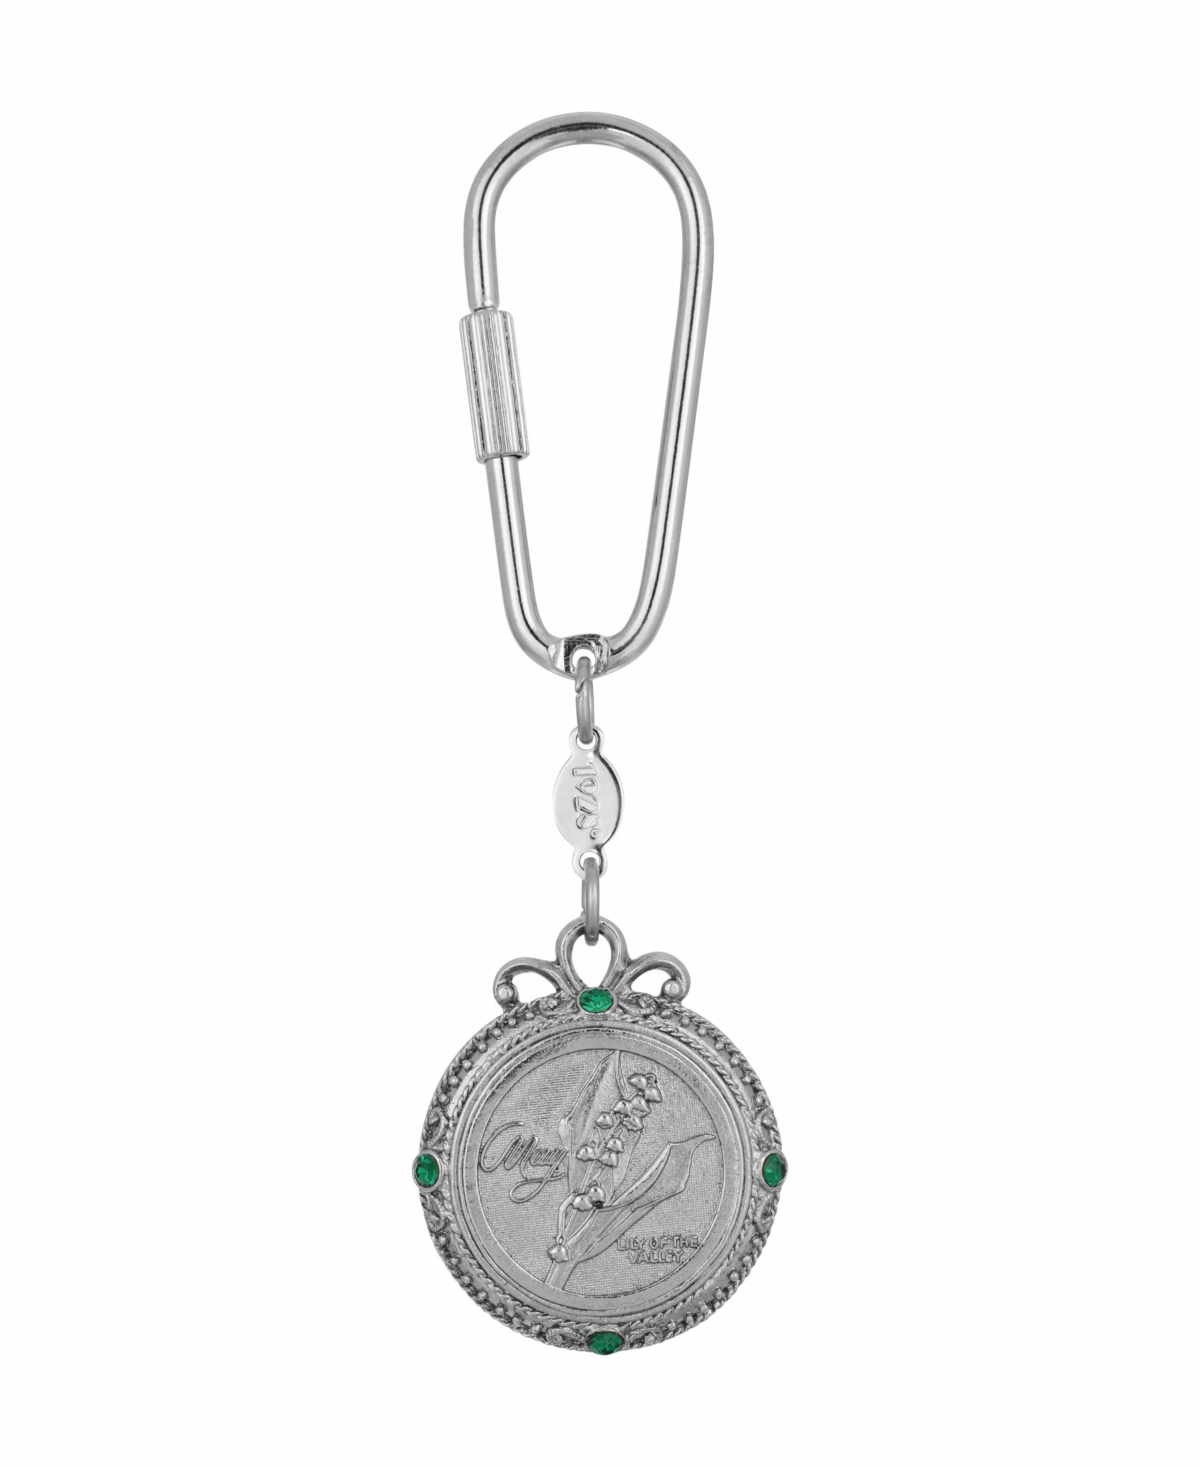 Women's May Flower of the Month Lily of the Valley Key Fob - Green